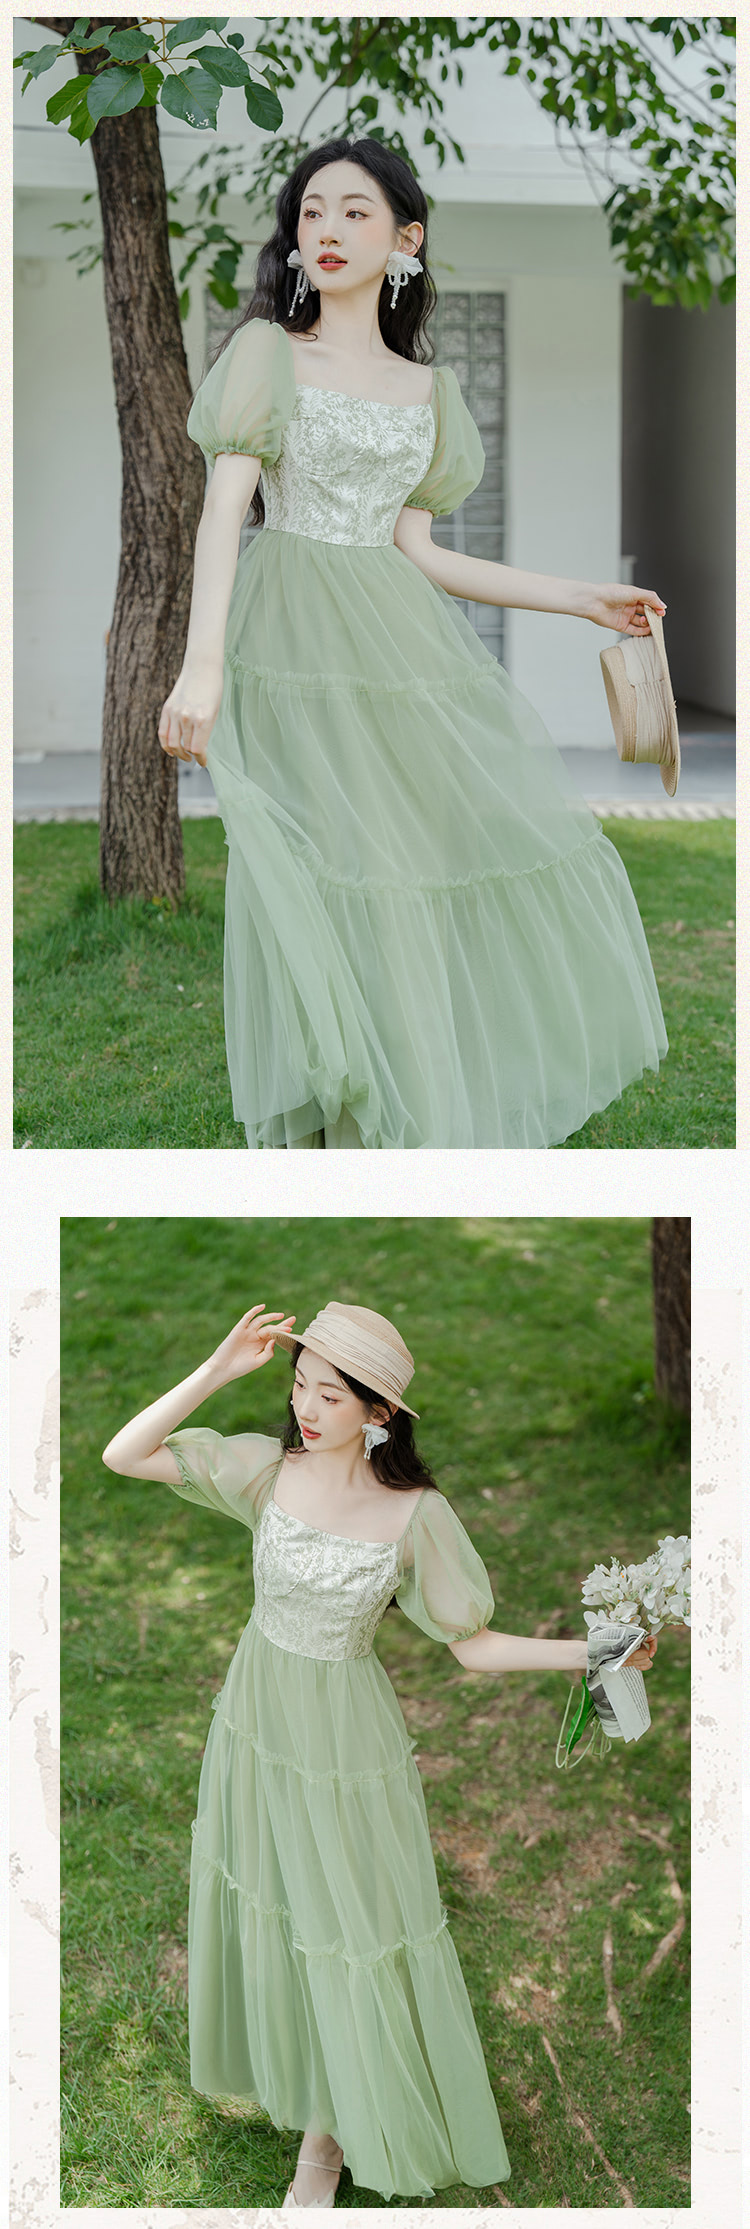 Sweet-French-Style-Green-Jacquard-Tulle-Floral-Summer-Casual-Dress13